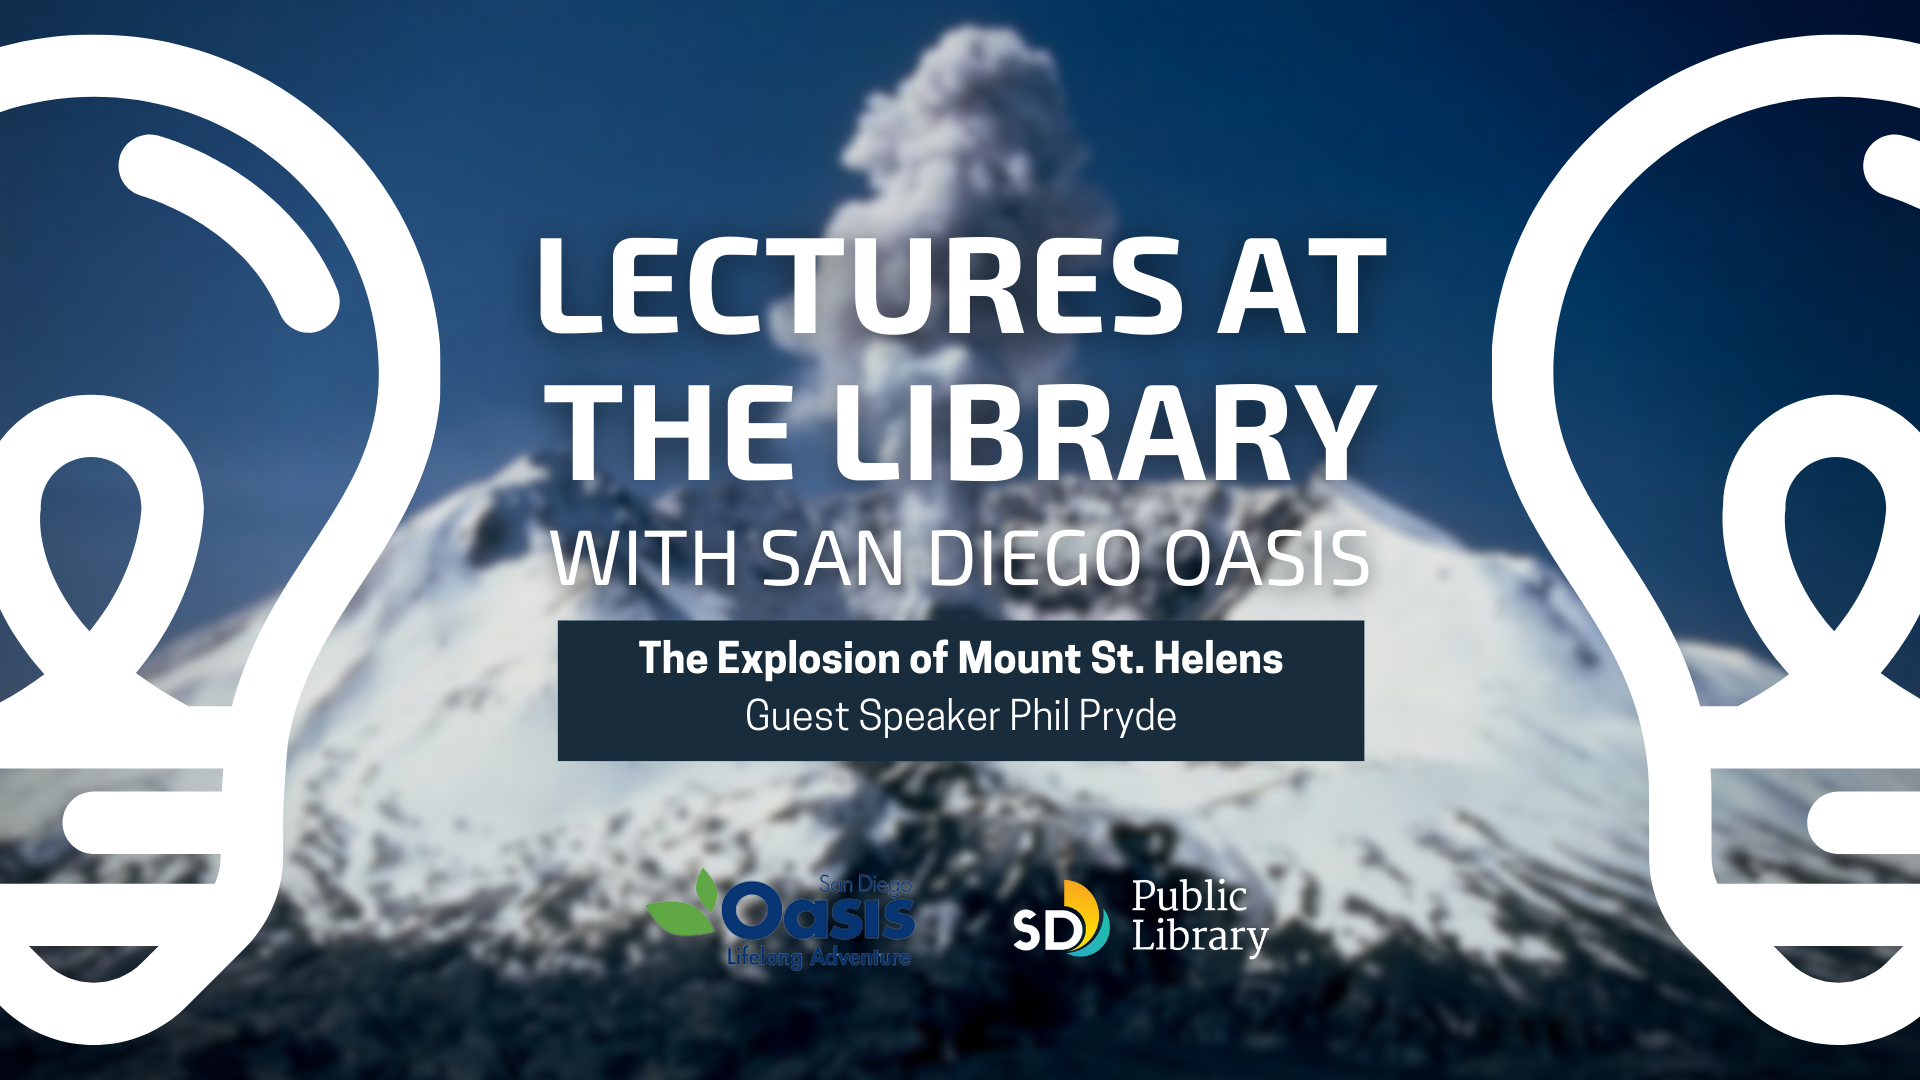 Lectures at the Library with Text: San Diego Oasis | The Explosion of Mount St. Helens/ guest speaker Phil Pryde imposed over image of Mt. St. Helens releasing plumes of gas